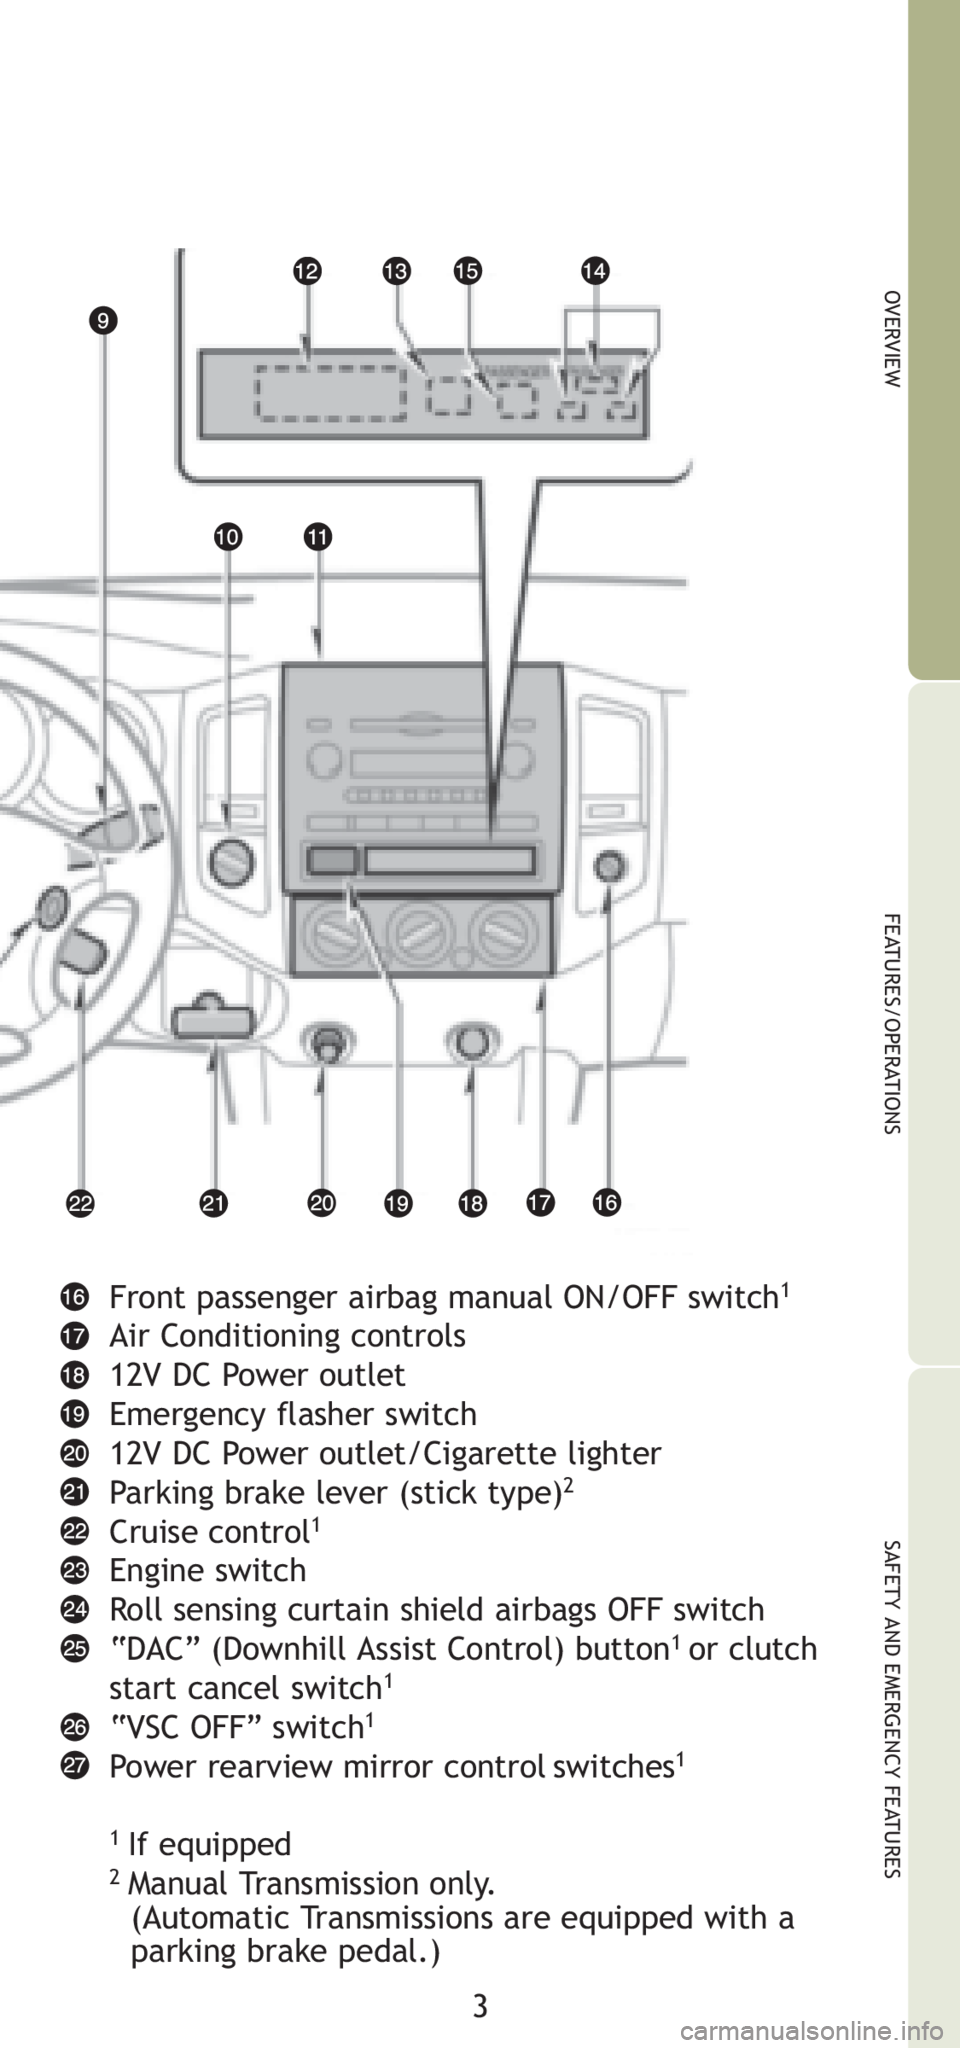 TOYOTA TACOMA 2008  Owners Manual (in English) 3
OVERVIEW
FEATURES/OPERATIONS
SAFETY AND EMERGENCY FEATURES
Front passenger airbag manual ON/OFF switch1
Air Conditioning controls
12V DC Power outlet
Emergency flasher switch
12V DC Power outlet/Cig